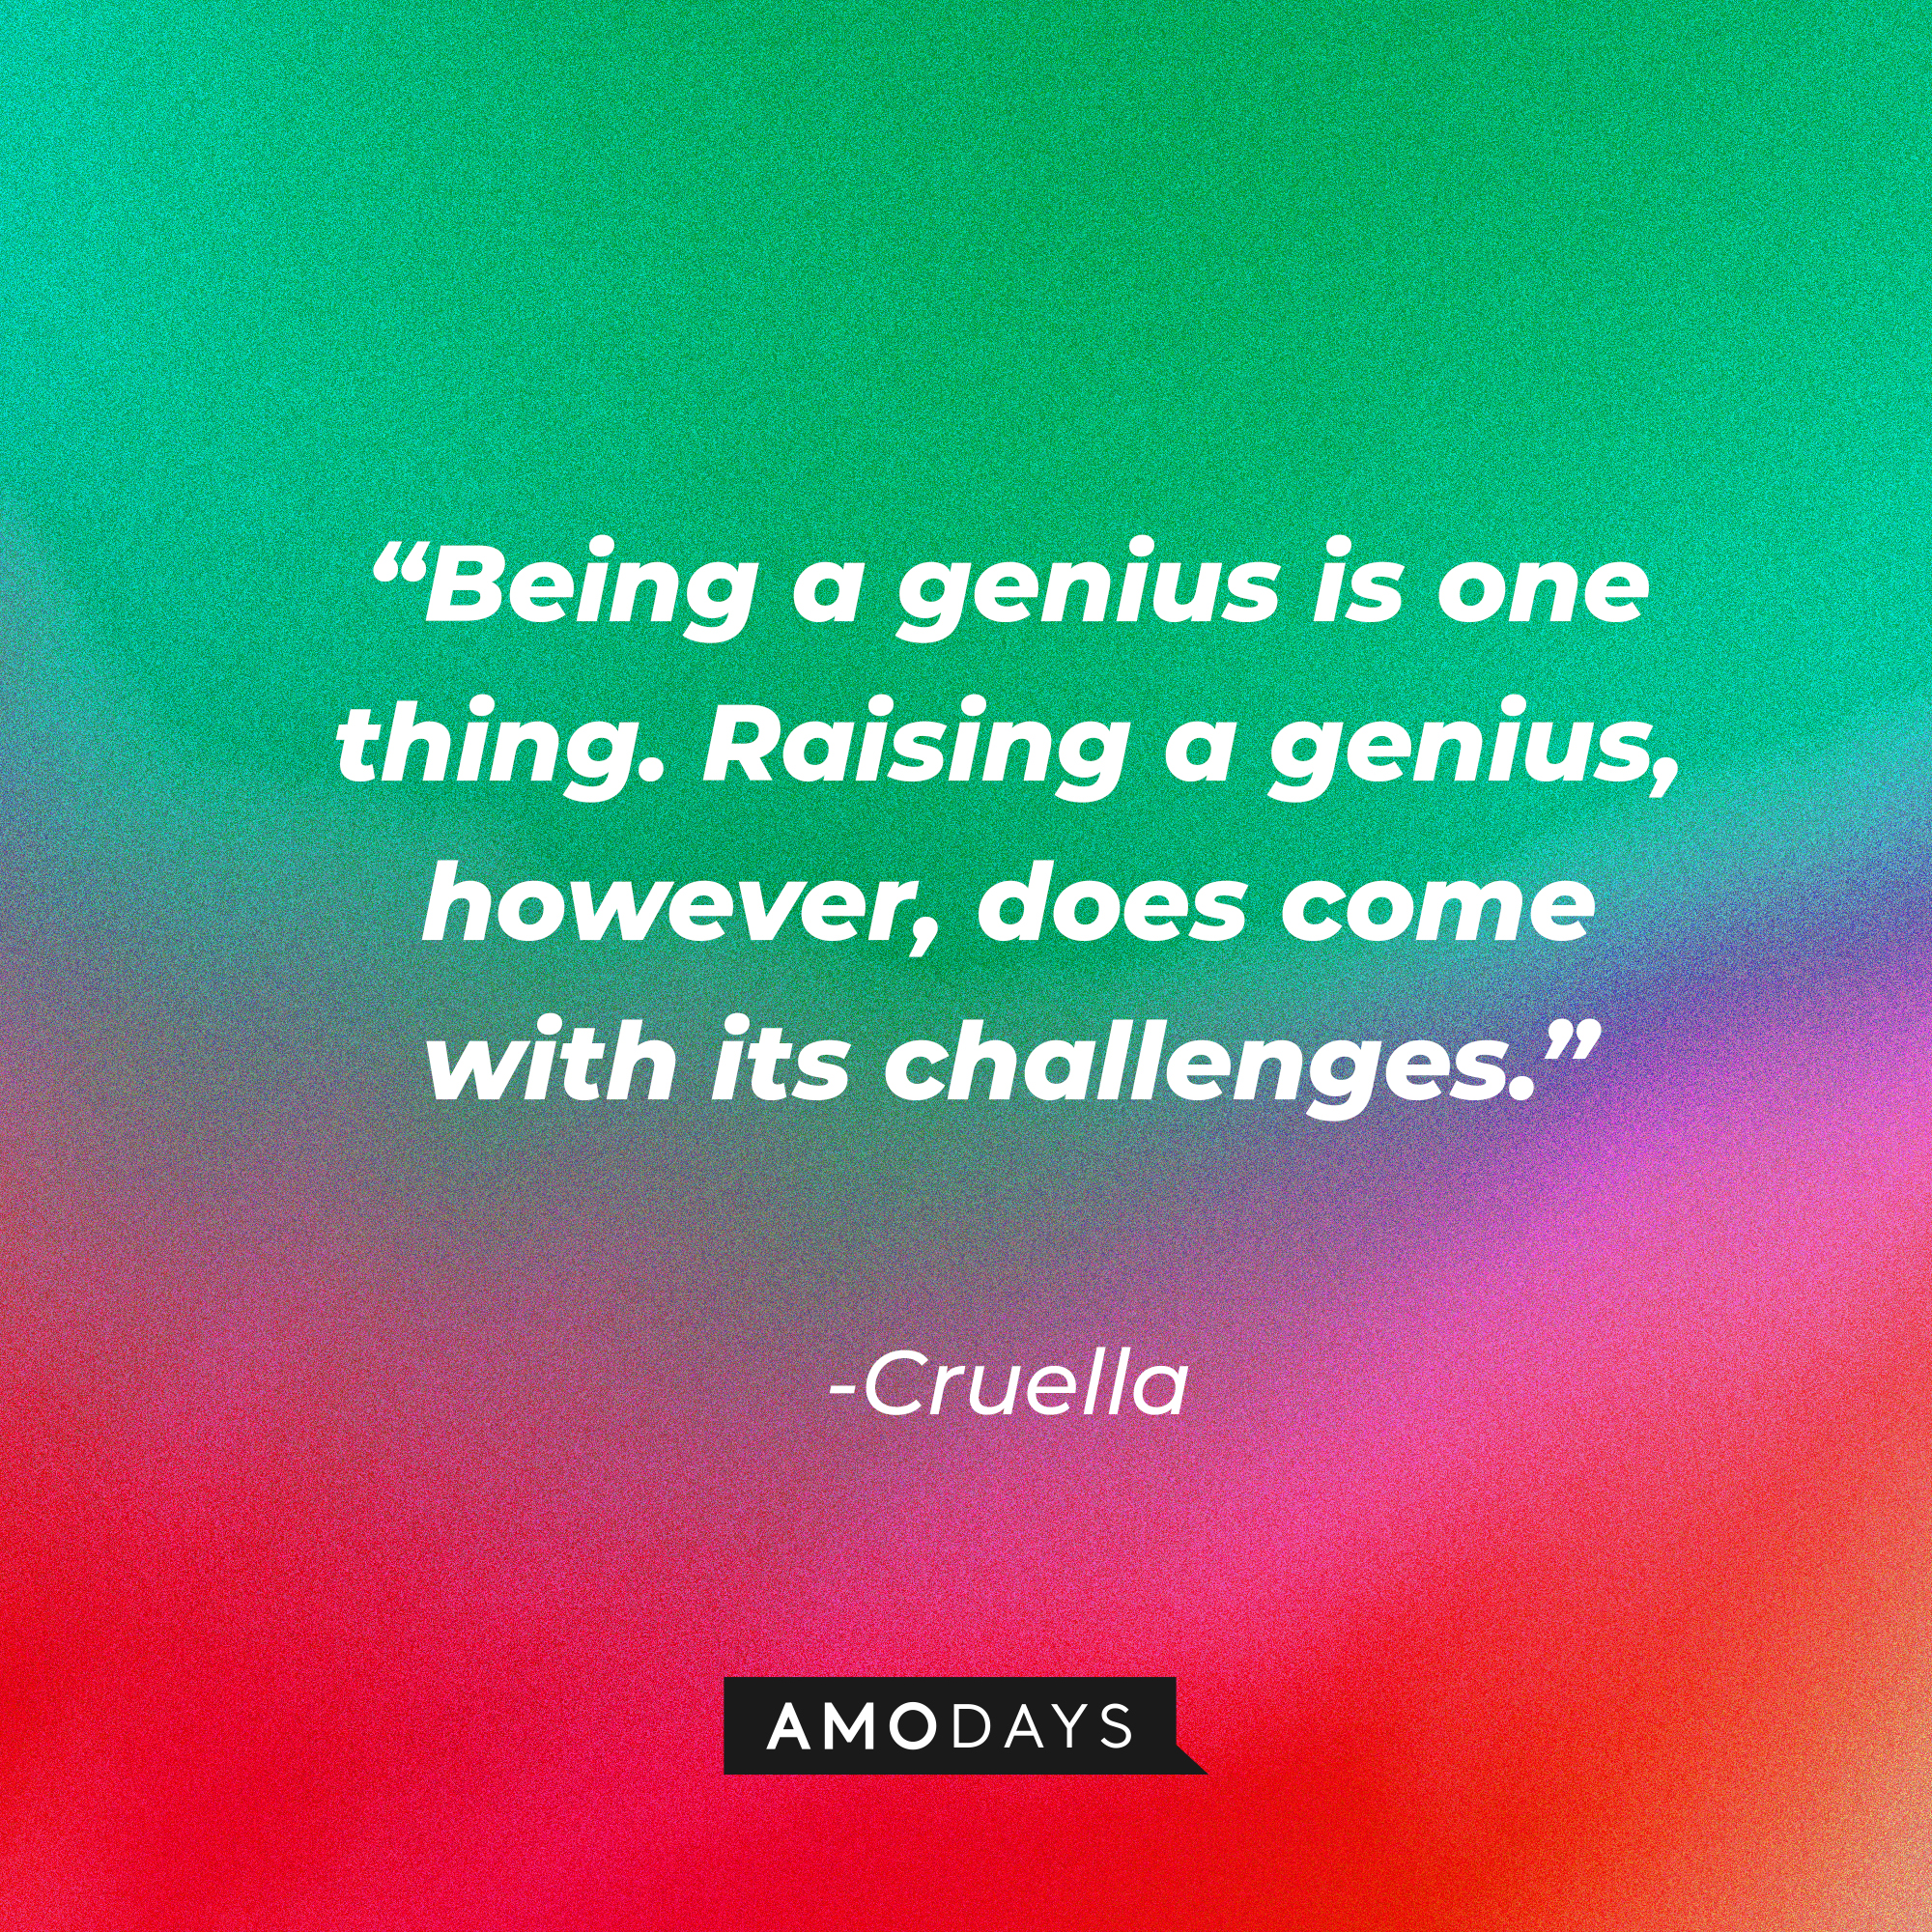 Cruella's quote: “Being a genius is one thing. Raising a genius, however, does come with its challenges.” | Source: Amodays